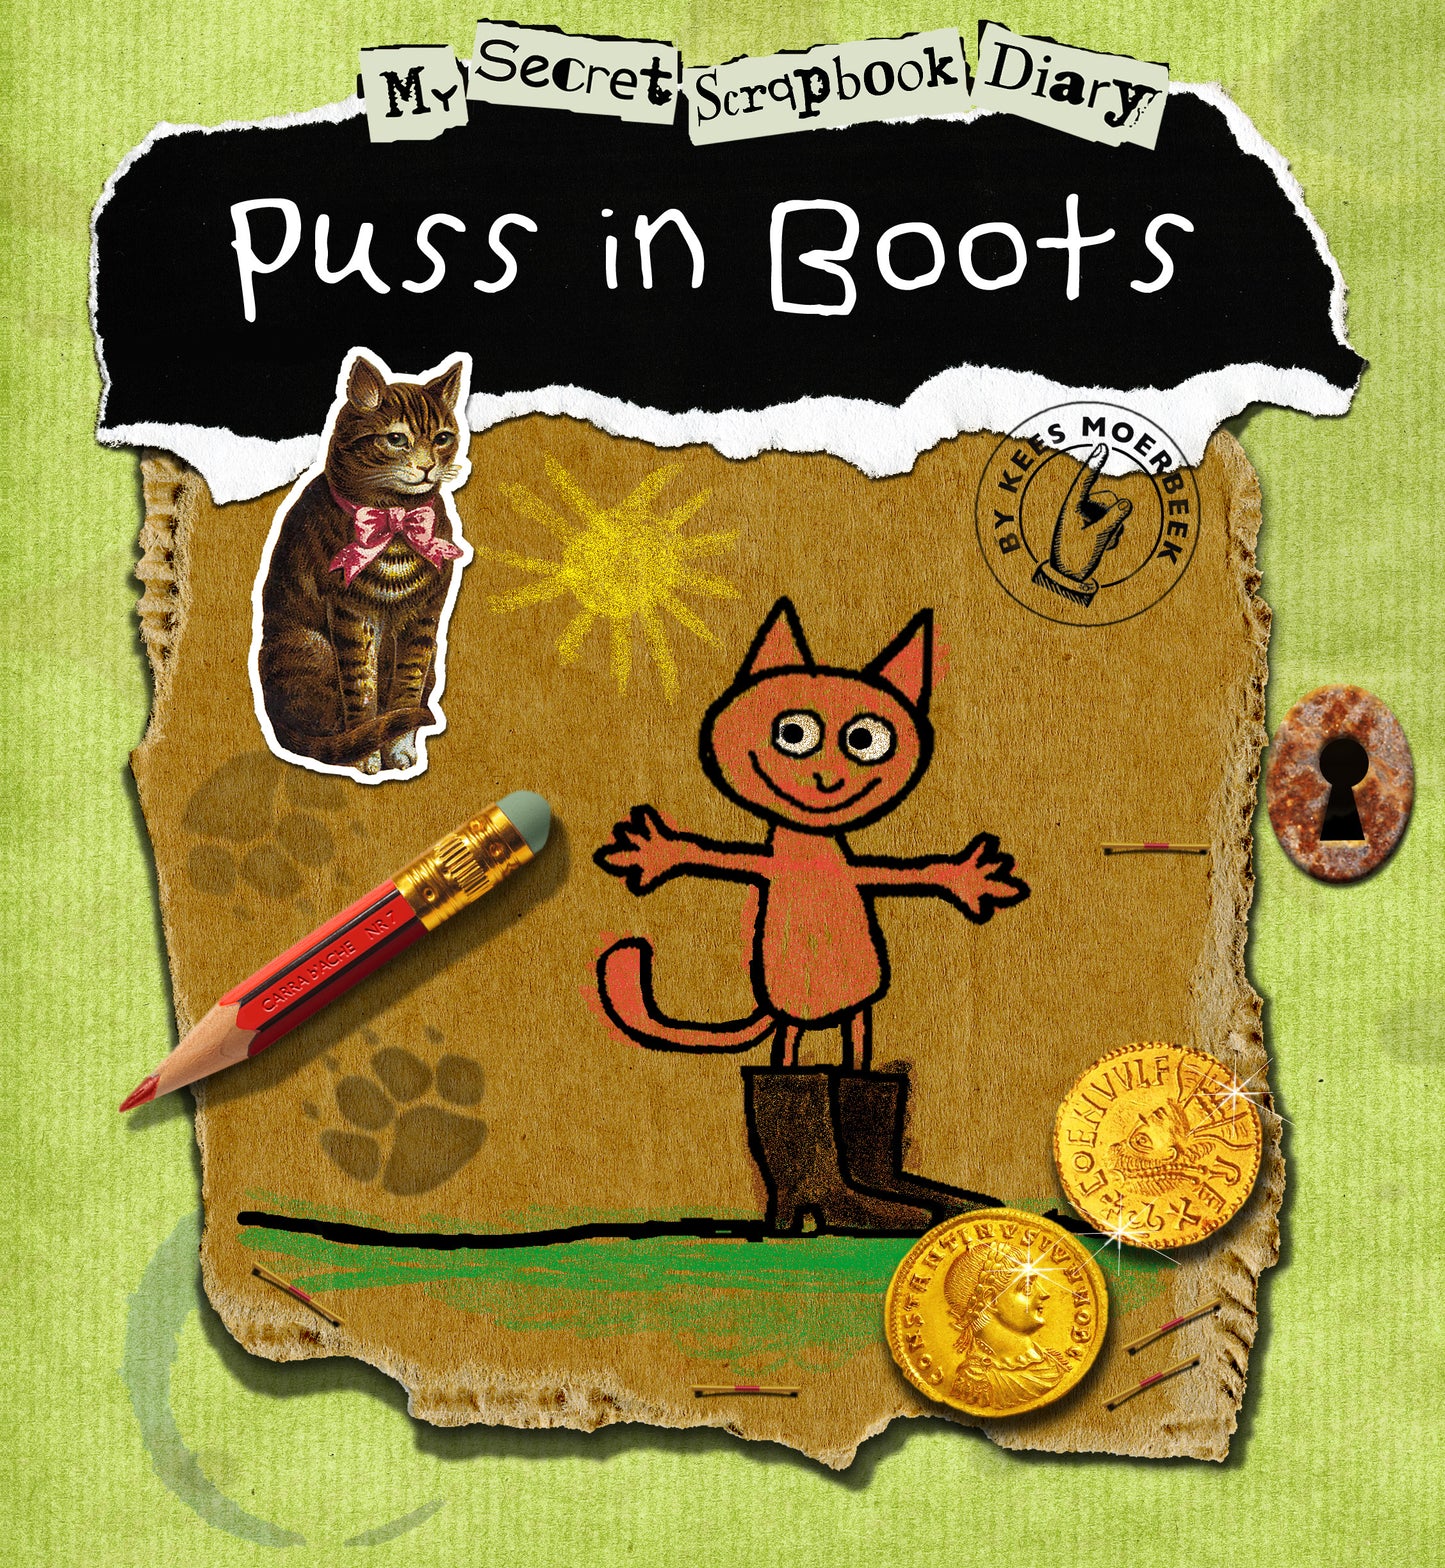 Puss in Boots: My Secret Scrapbook Diary